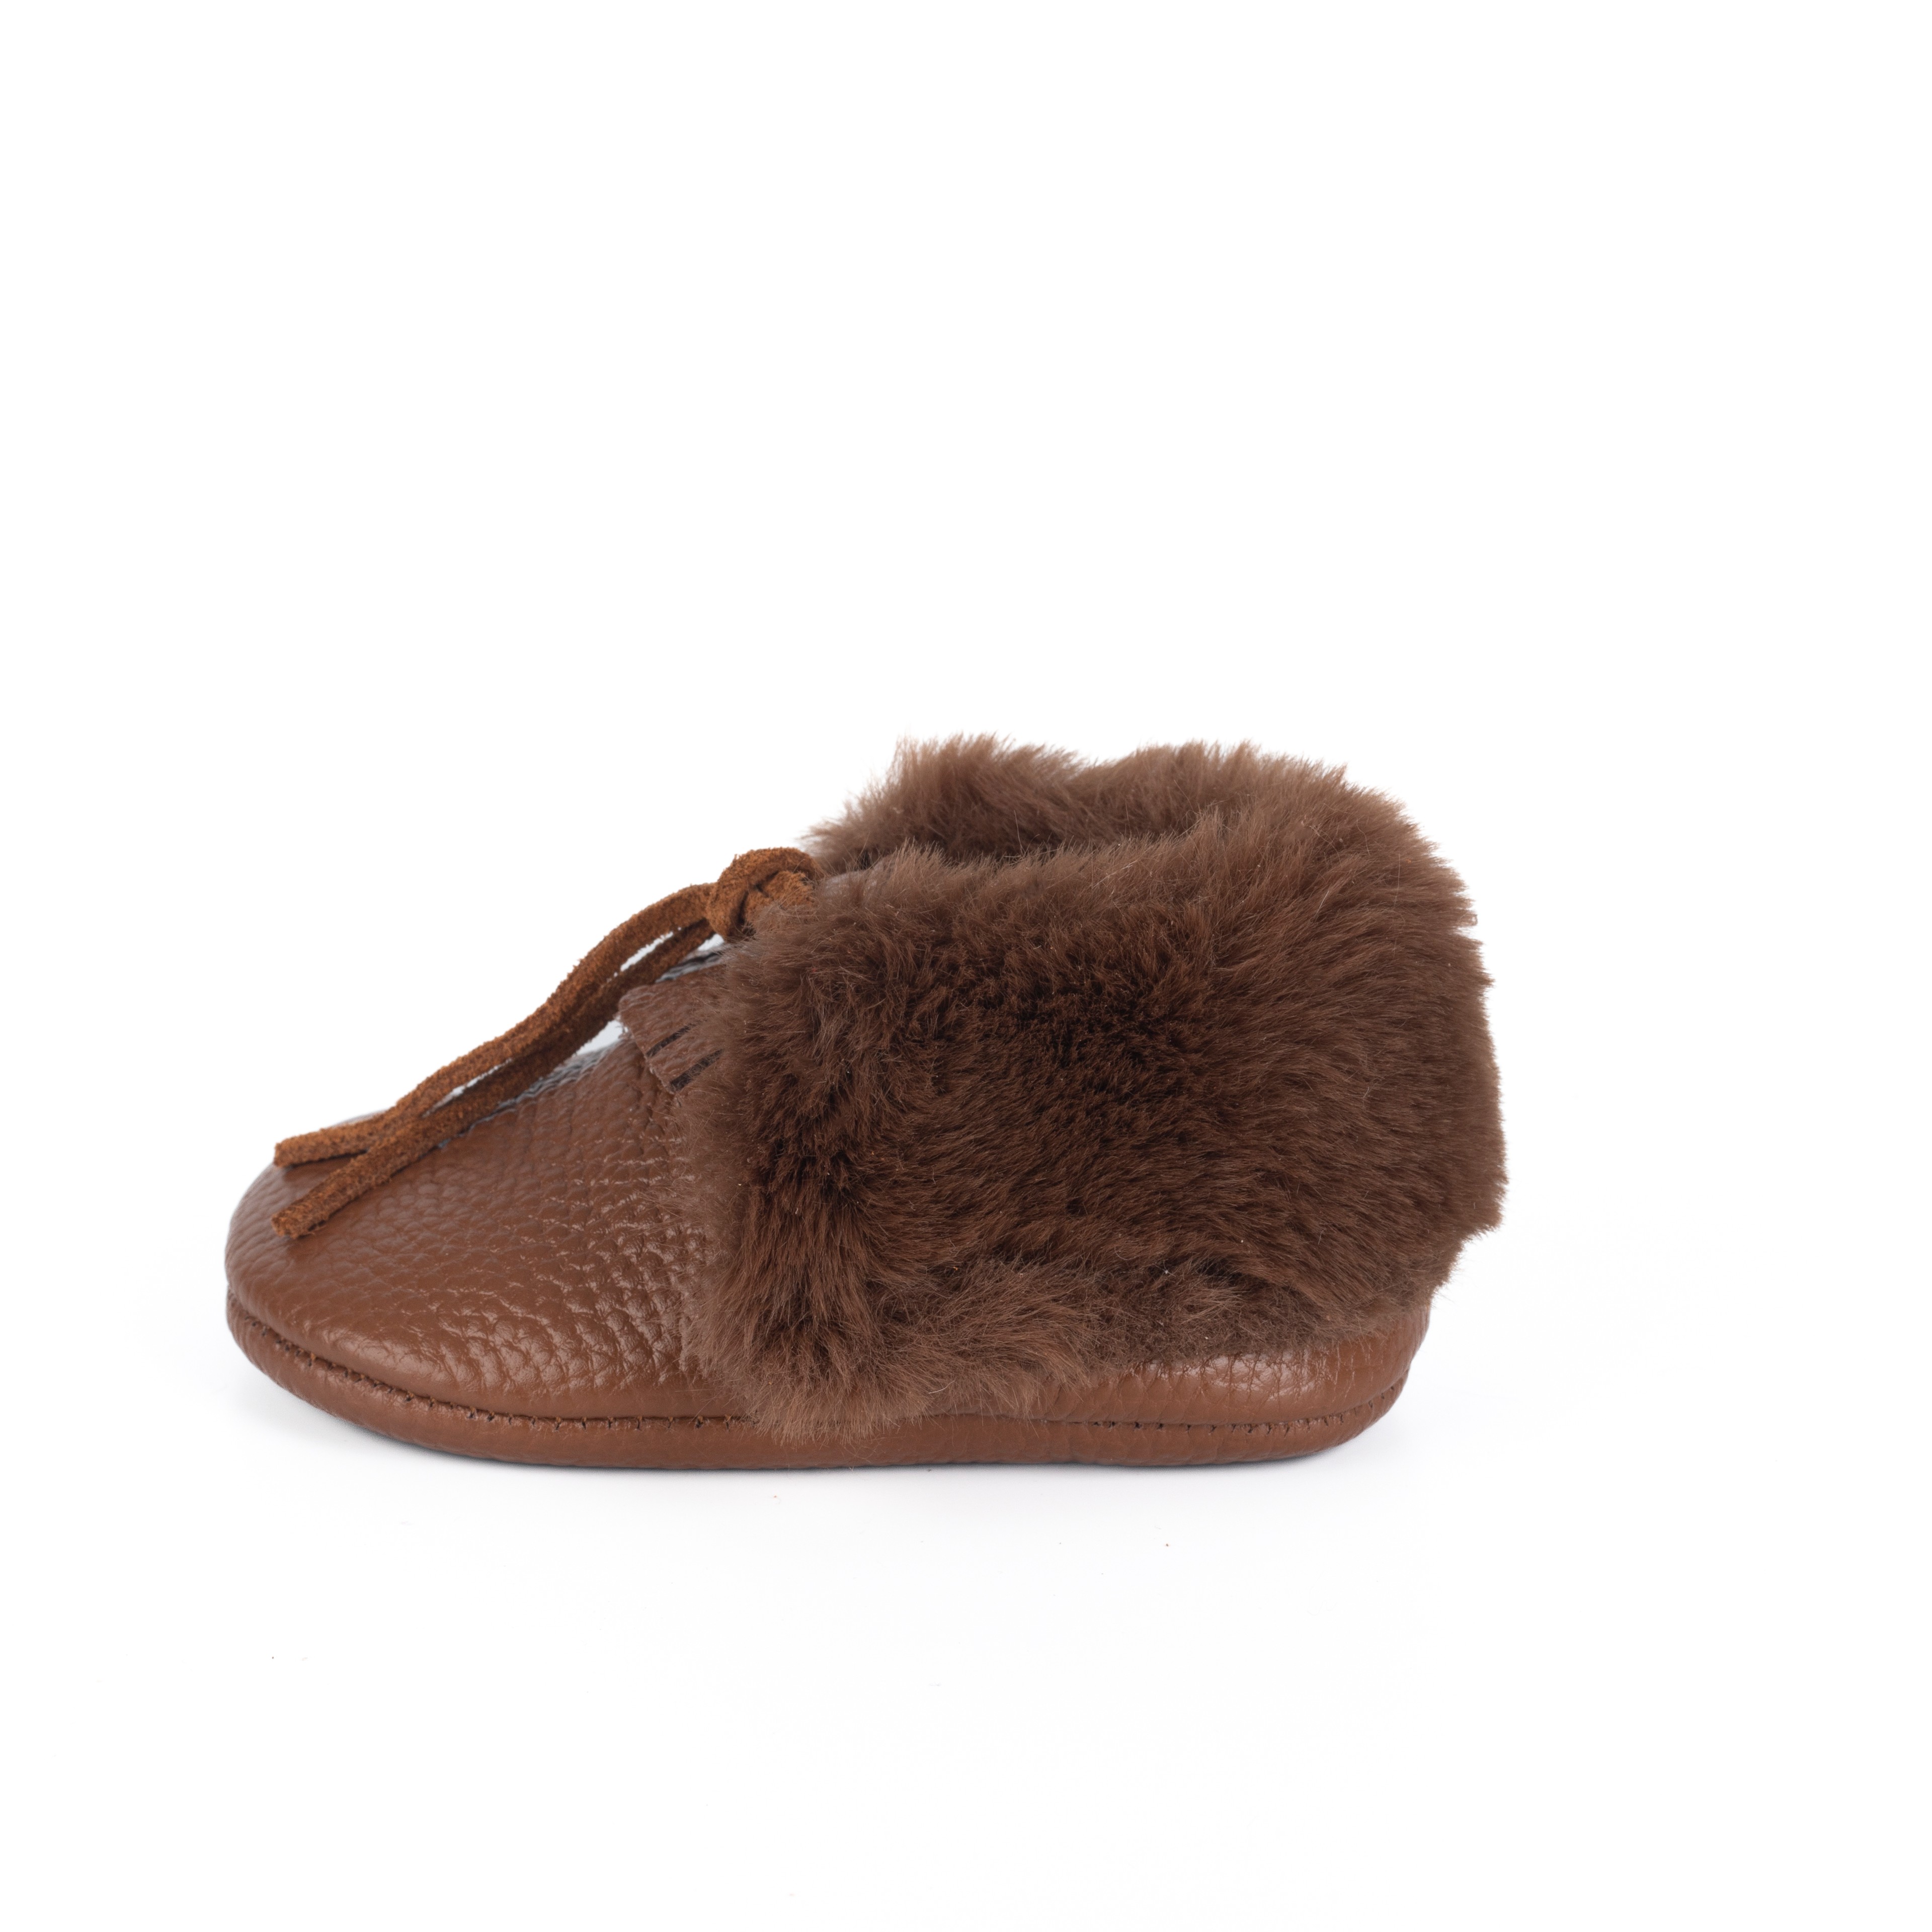 Yoyo Junior Bootie genuine leather in brown with suede laces and outer fur detail